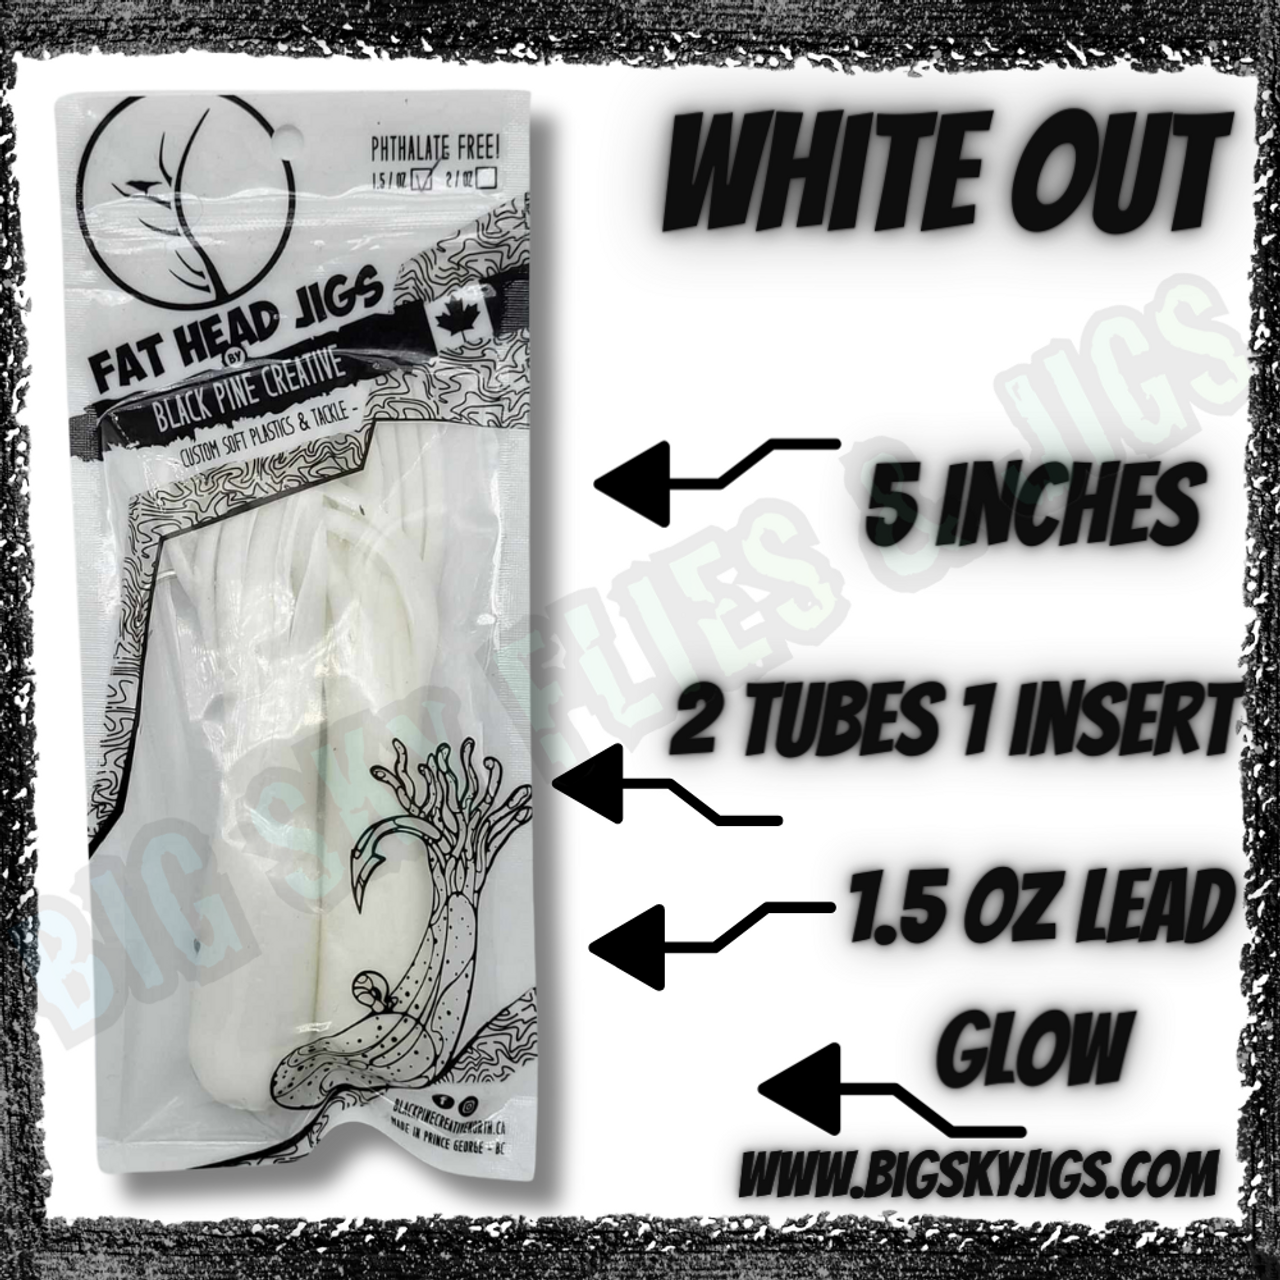 The Glow White Out Lake Trout Tube. Crafted with durability and reliability in mind, this tube sets the standard for performance on the water.
Weighing in at 2 oz, this tube offers the optimal balance for targeting lake trout in a variety of conditions. Its glow-in-the-dark feature combined with the White Out coloration creates a striking visual profile that entices even the most cautious of trout, ensuring visibility and attraction in all lighting conditions.

Built to withstand the rigorous demands of lake trout fishing, this tube is engineered for durability. Whether you're navigating rocky shores or battling swift currents, you can trust in the resilience of this tube to maintain its integrity and effectiveness throughout your angling endeavors.

Reliability is paramount when it comes to landing trophy catches, and this tube delivers on all fronts. Featuring robust hooks and premium construction, it instills confidence with every cast, ensuring that your gear performs flawlessly when it matters most.

So, arm yourself with the 2 oz Glow White Out Lake Trout Tube and embark on your next fishing expedition with unwavering confidence. Cast out, explore the depths, and reel in the trophy lake trout of your dreams with this steadfast companion leading the way.